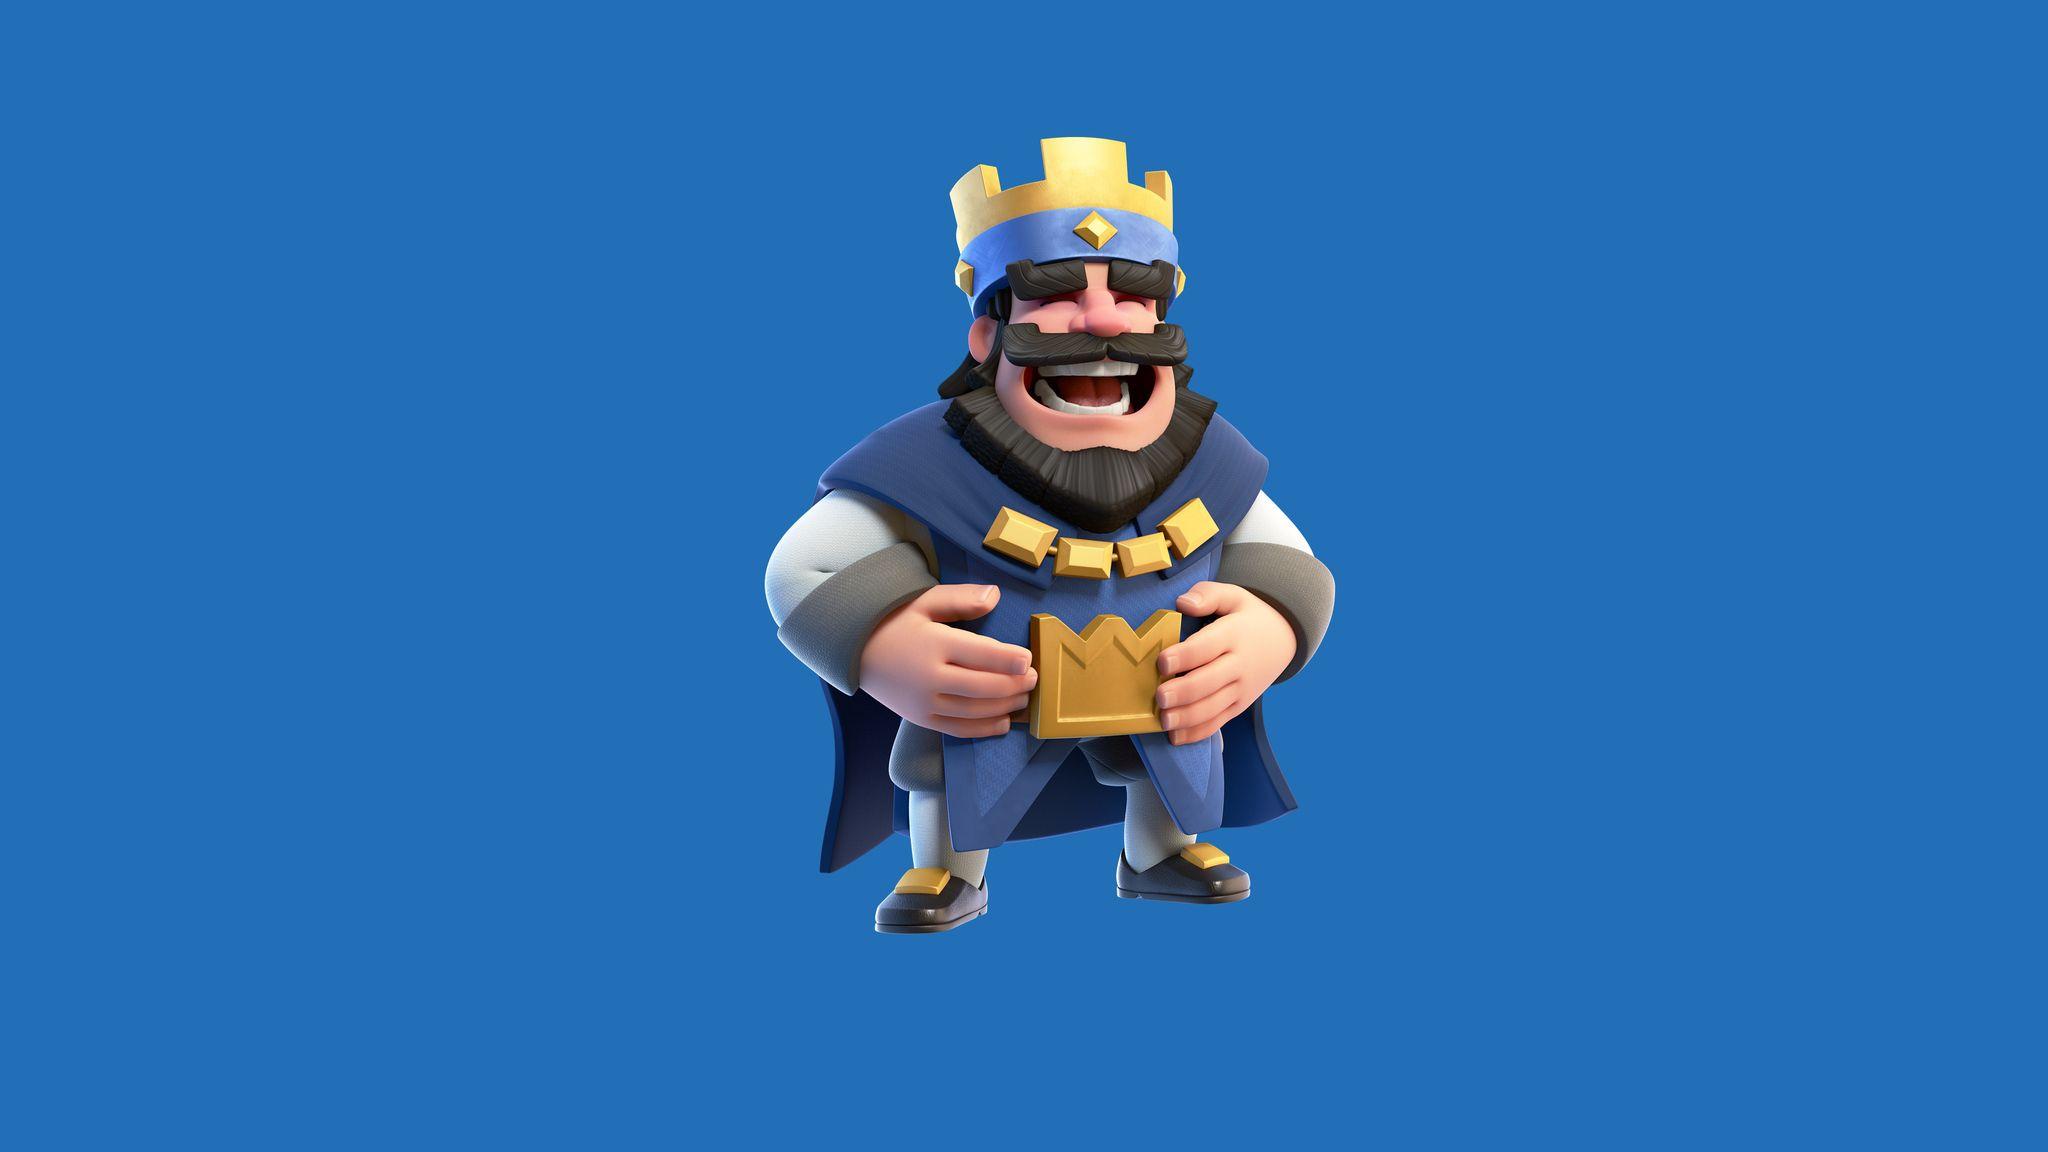 Download Clash Royale Supercell Game HD Wallpaper In 2048x1152